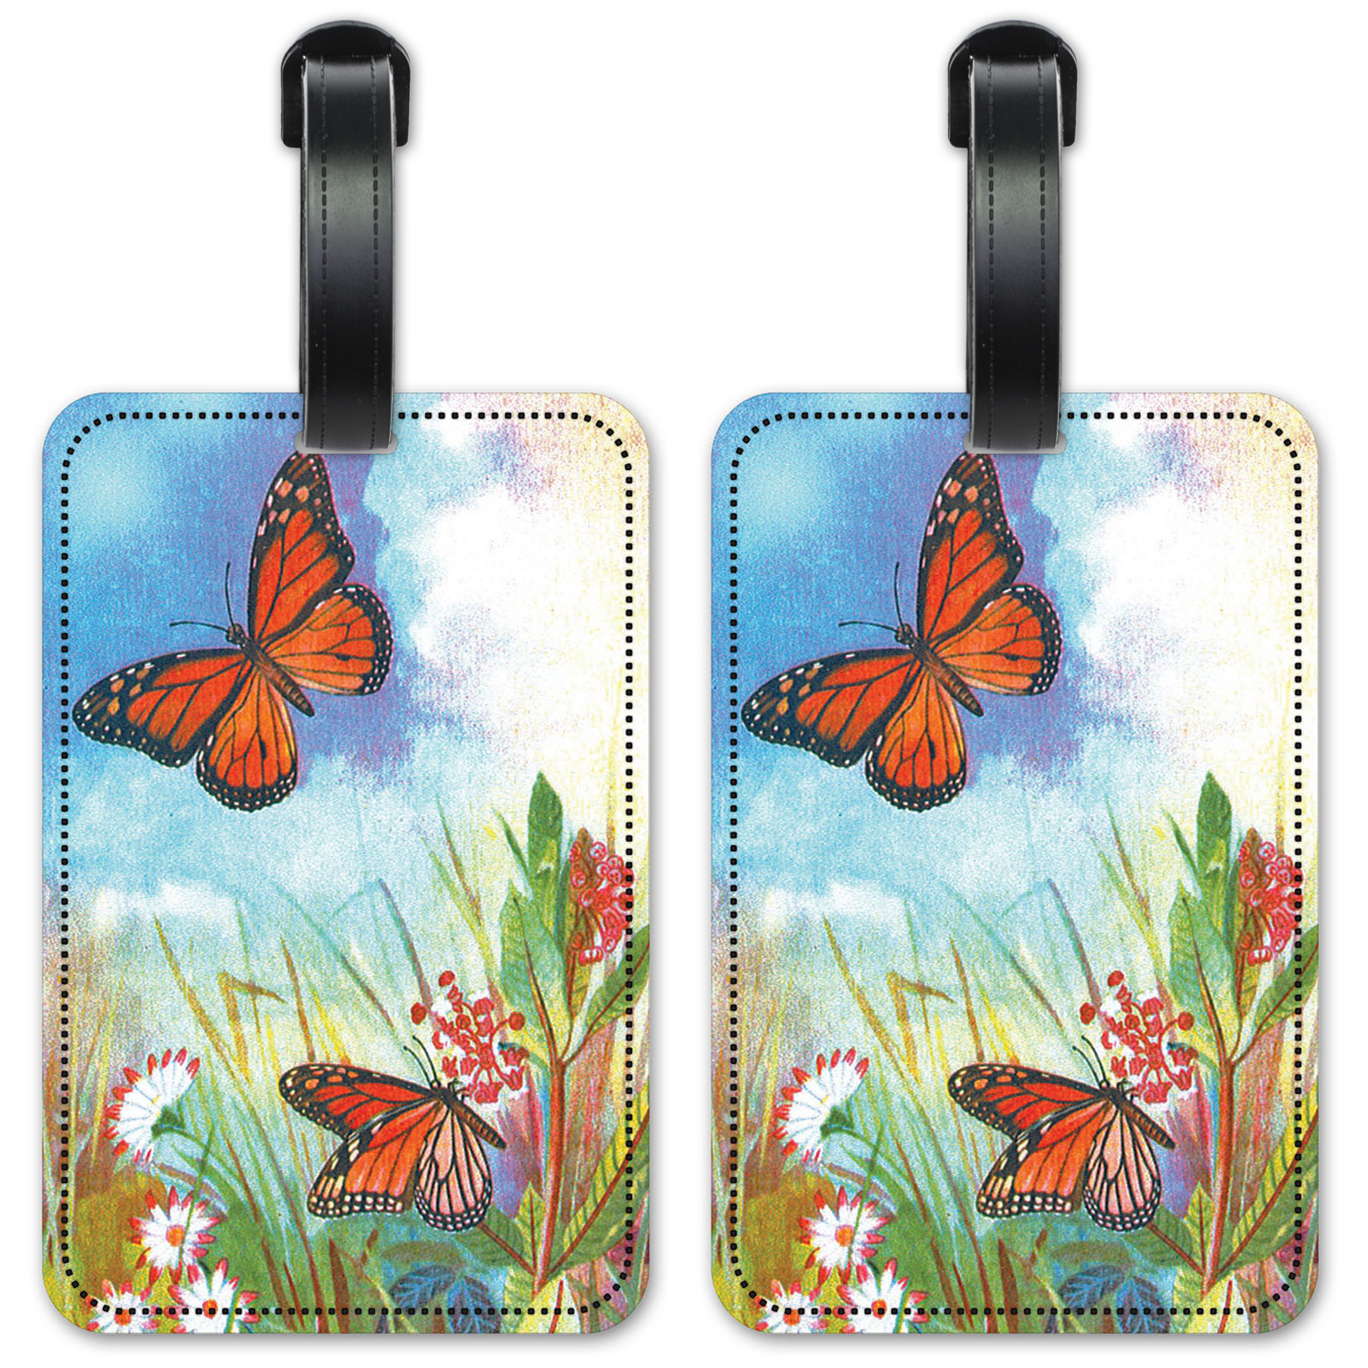 Butterflies and Flowers - #178